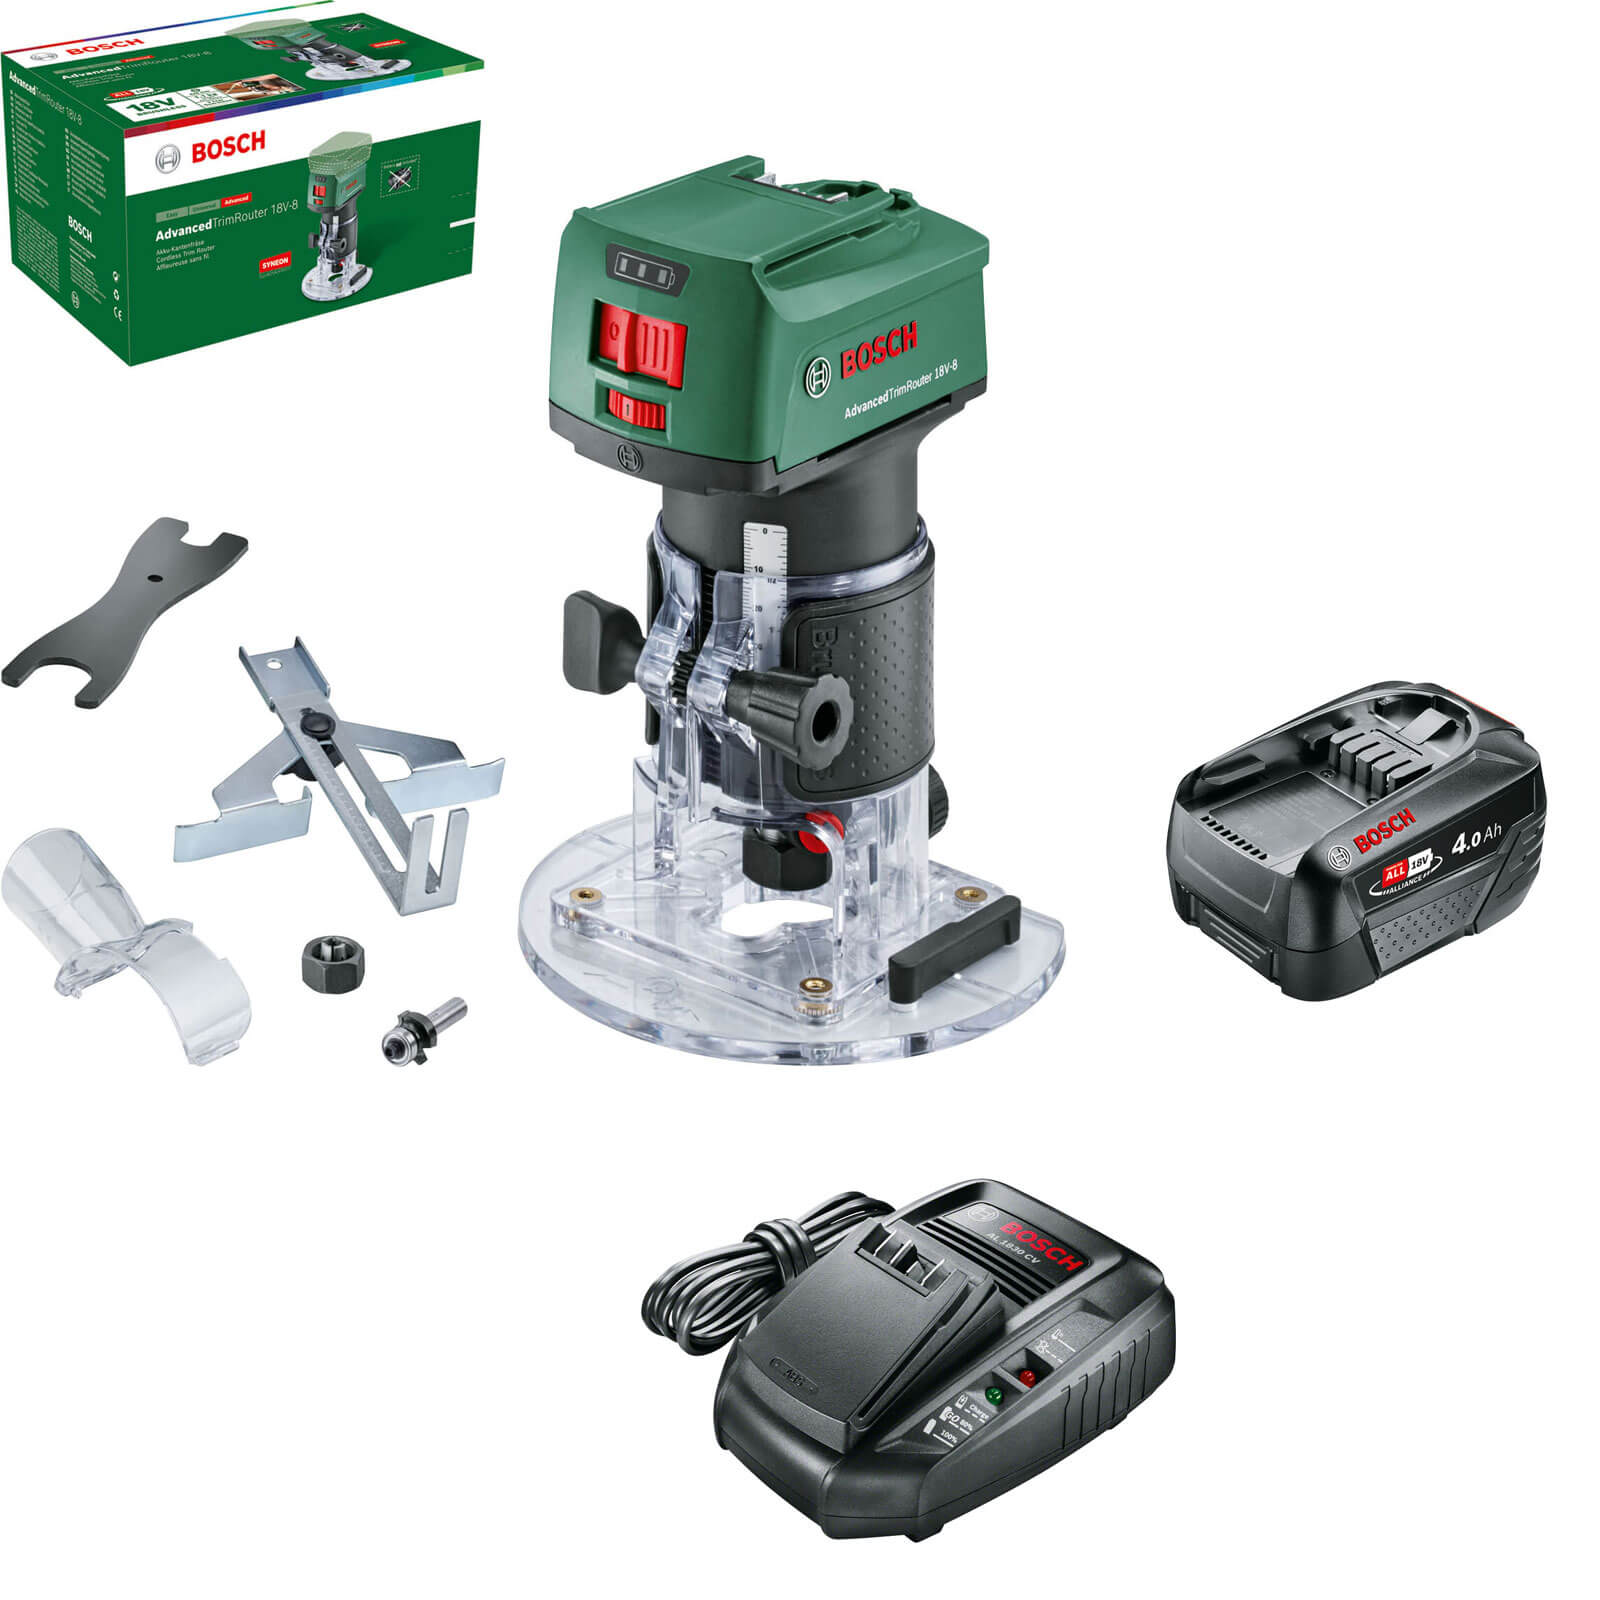 Bosch ADVANCEDTRIMROUTER 18V-8 P4A 18v Cordless Trim Router 1 x 4ah Li-ion Charger No Case FREE UK 1/4" Collet Worth £11.95 Extra !